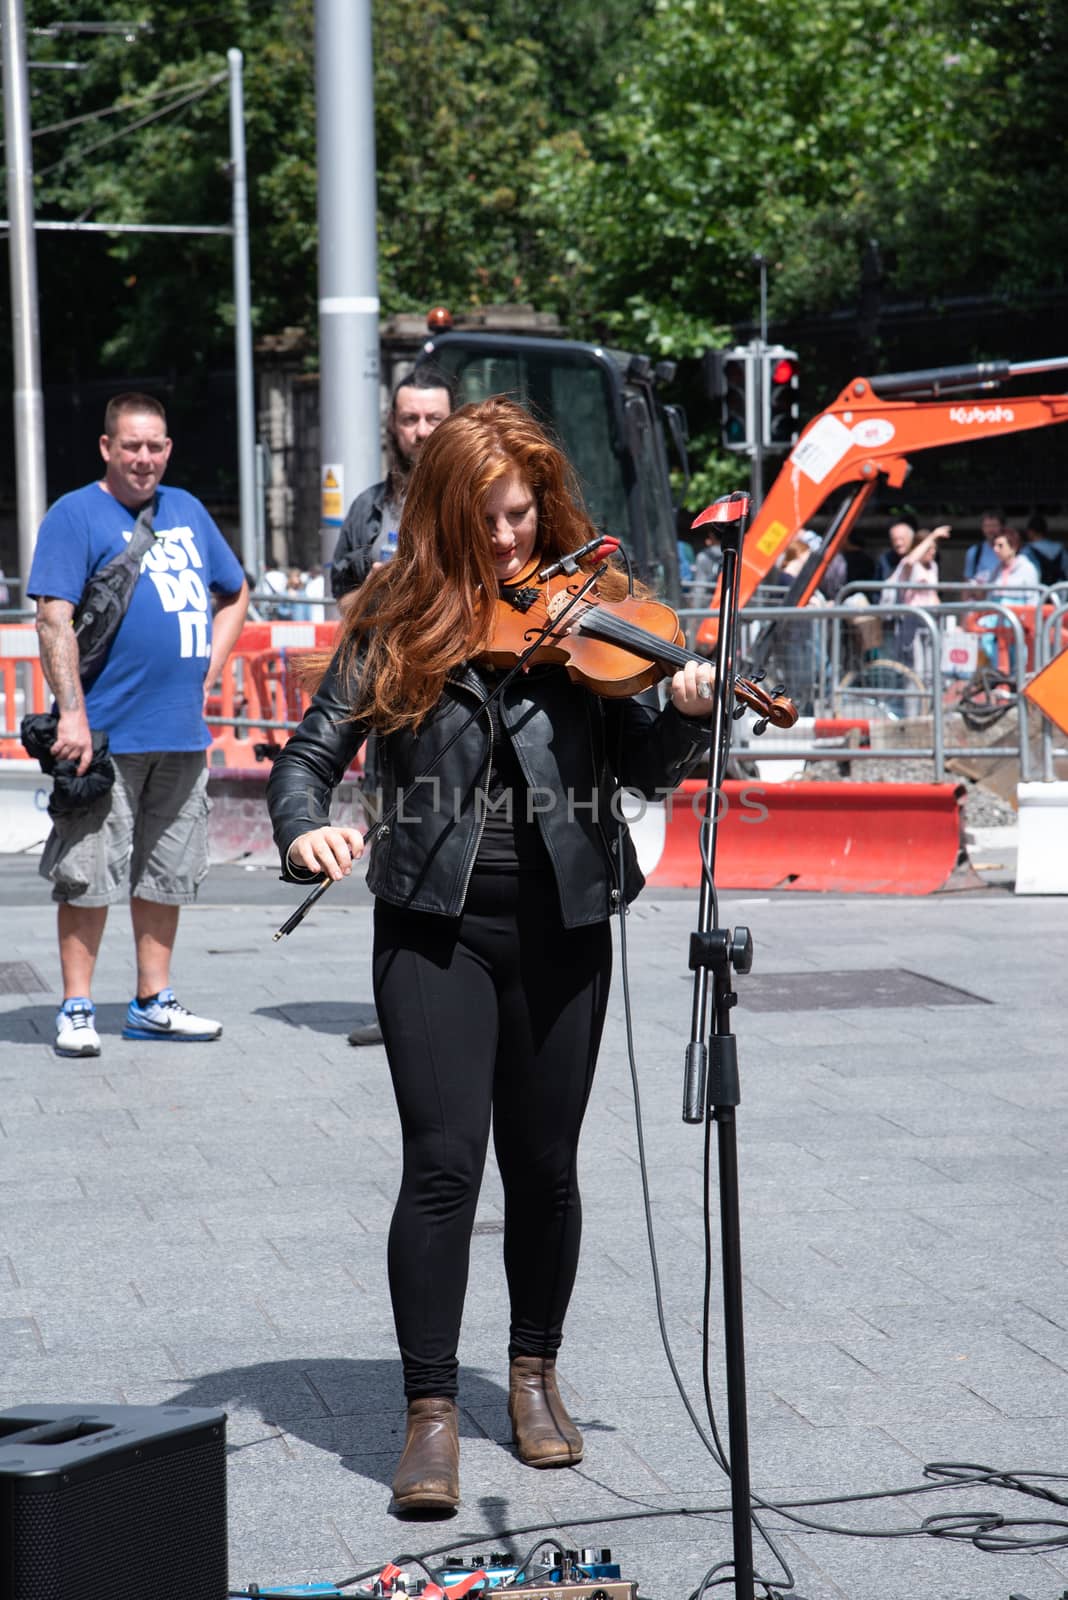 Dublin, Ireland--July 16, 2018. A musician playing the violin on the street with pedestrians in the background.